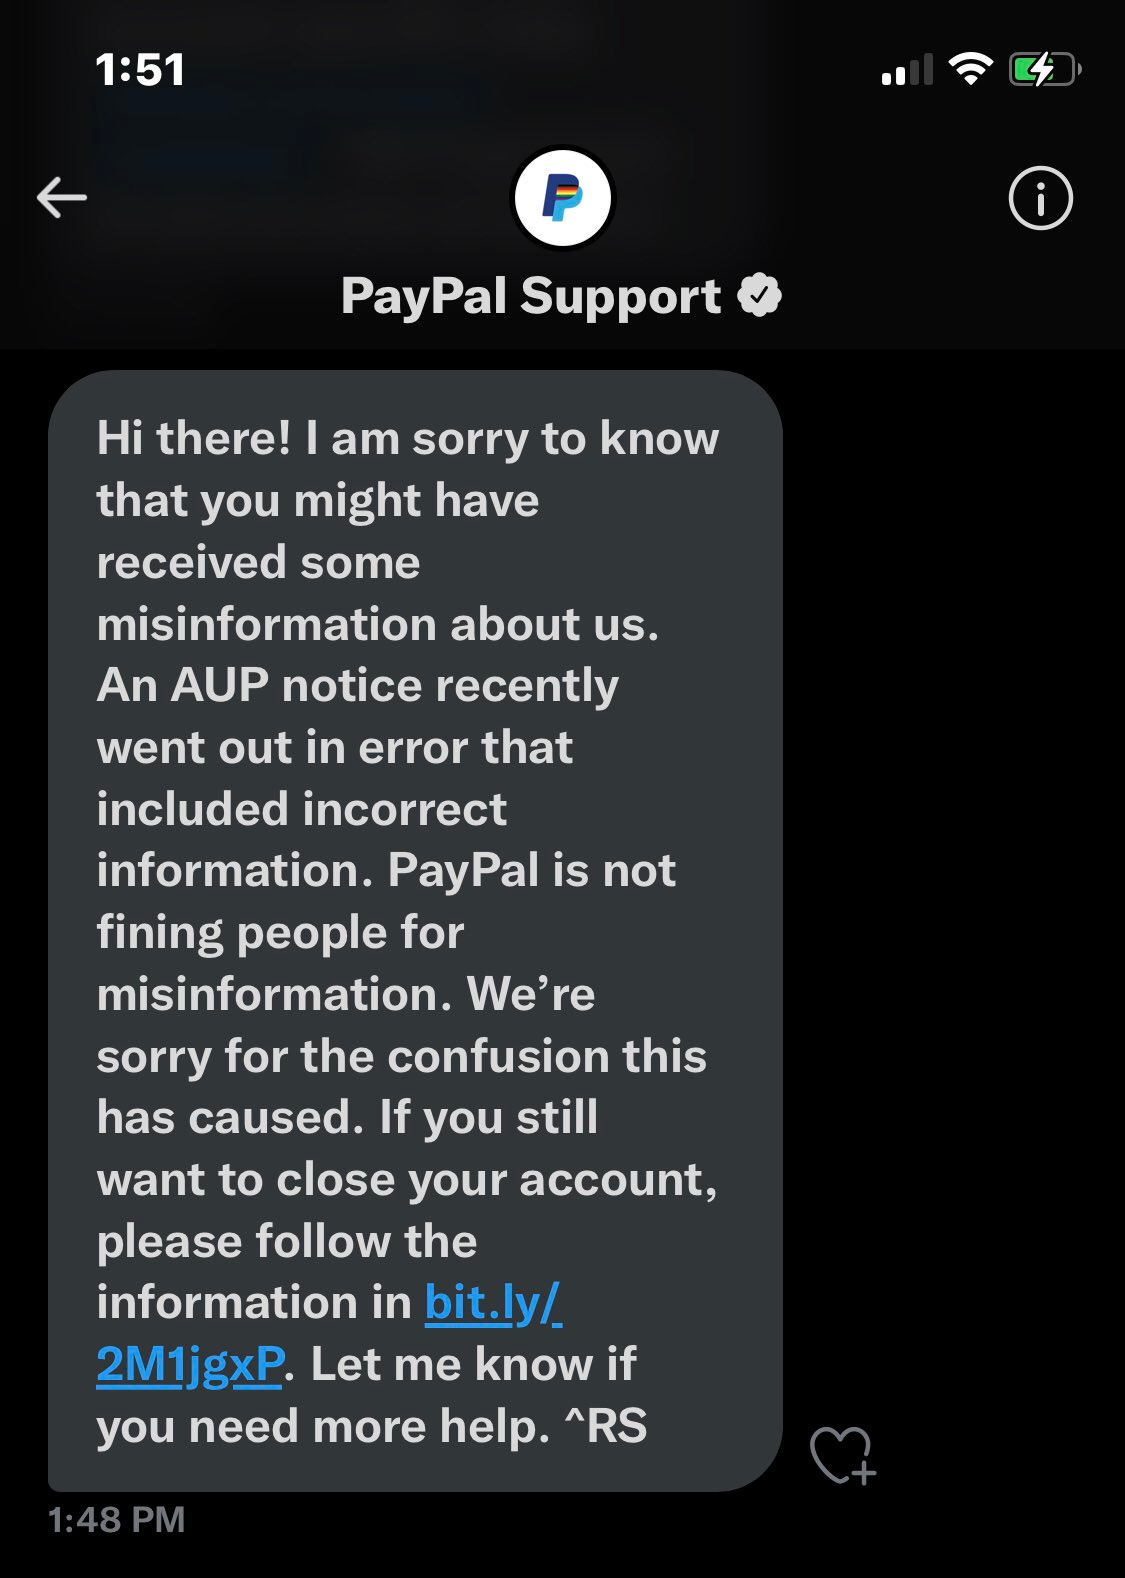 PayPal Support chat with the text: Hi there! I am sorry to know that you might have received some misinformation about us. An AUP notice recently went out in error that included incorrect information. PayPal is not fining people for misinformation. We're sorry for the confusion this has caused. If you still want to close your account, please follow the information in bit.ly/2M1jgxP. Let me know if you need more help. ^RS